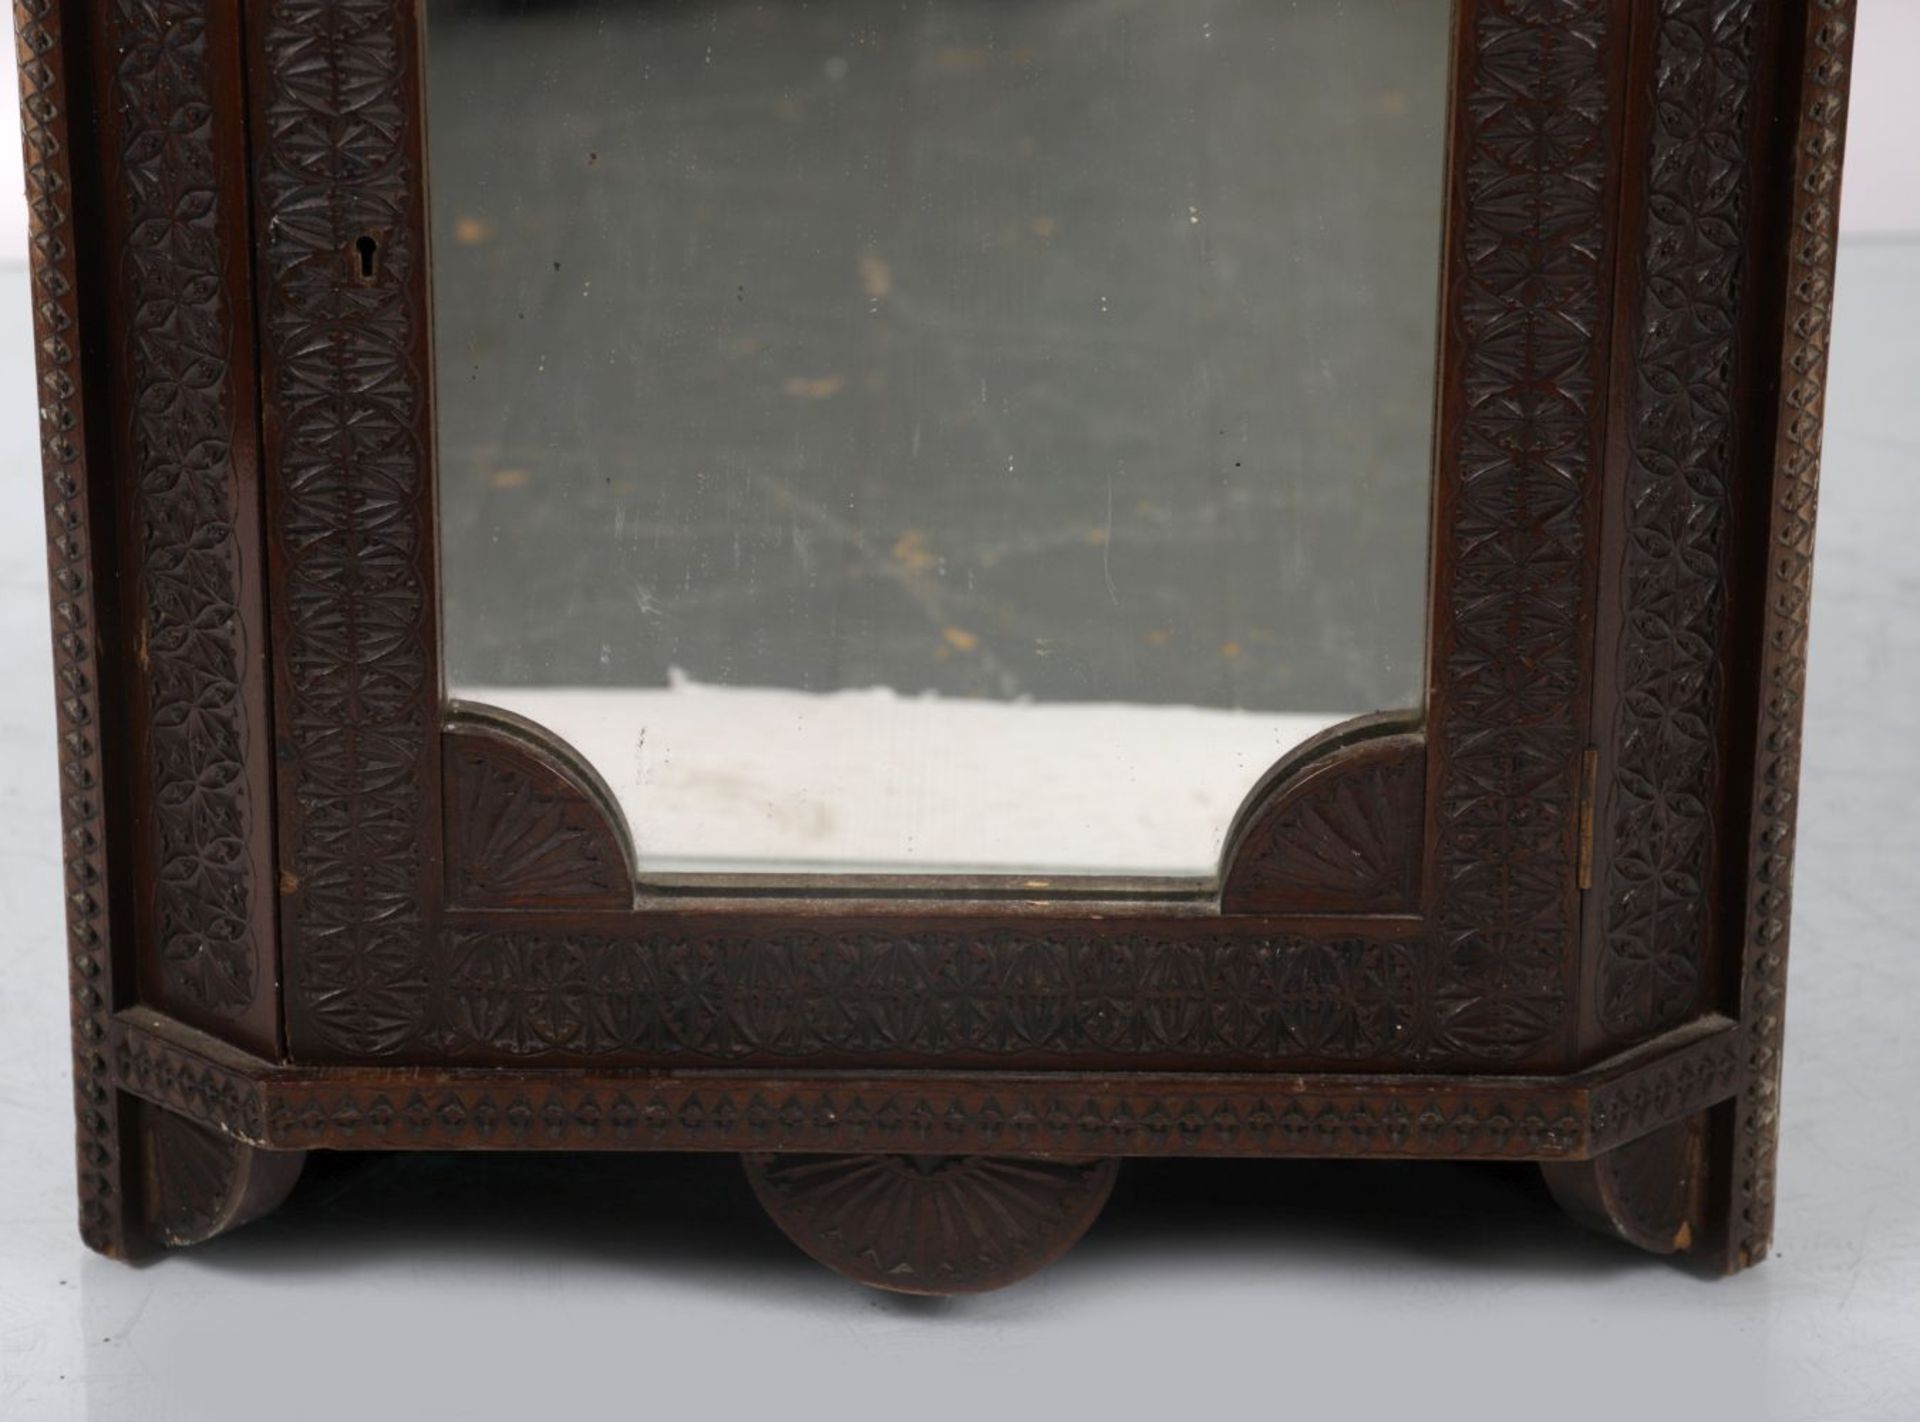 EARLY 20TH-CENTURY HANGING CORNER CABINET - Image 4 of 4